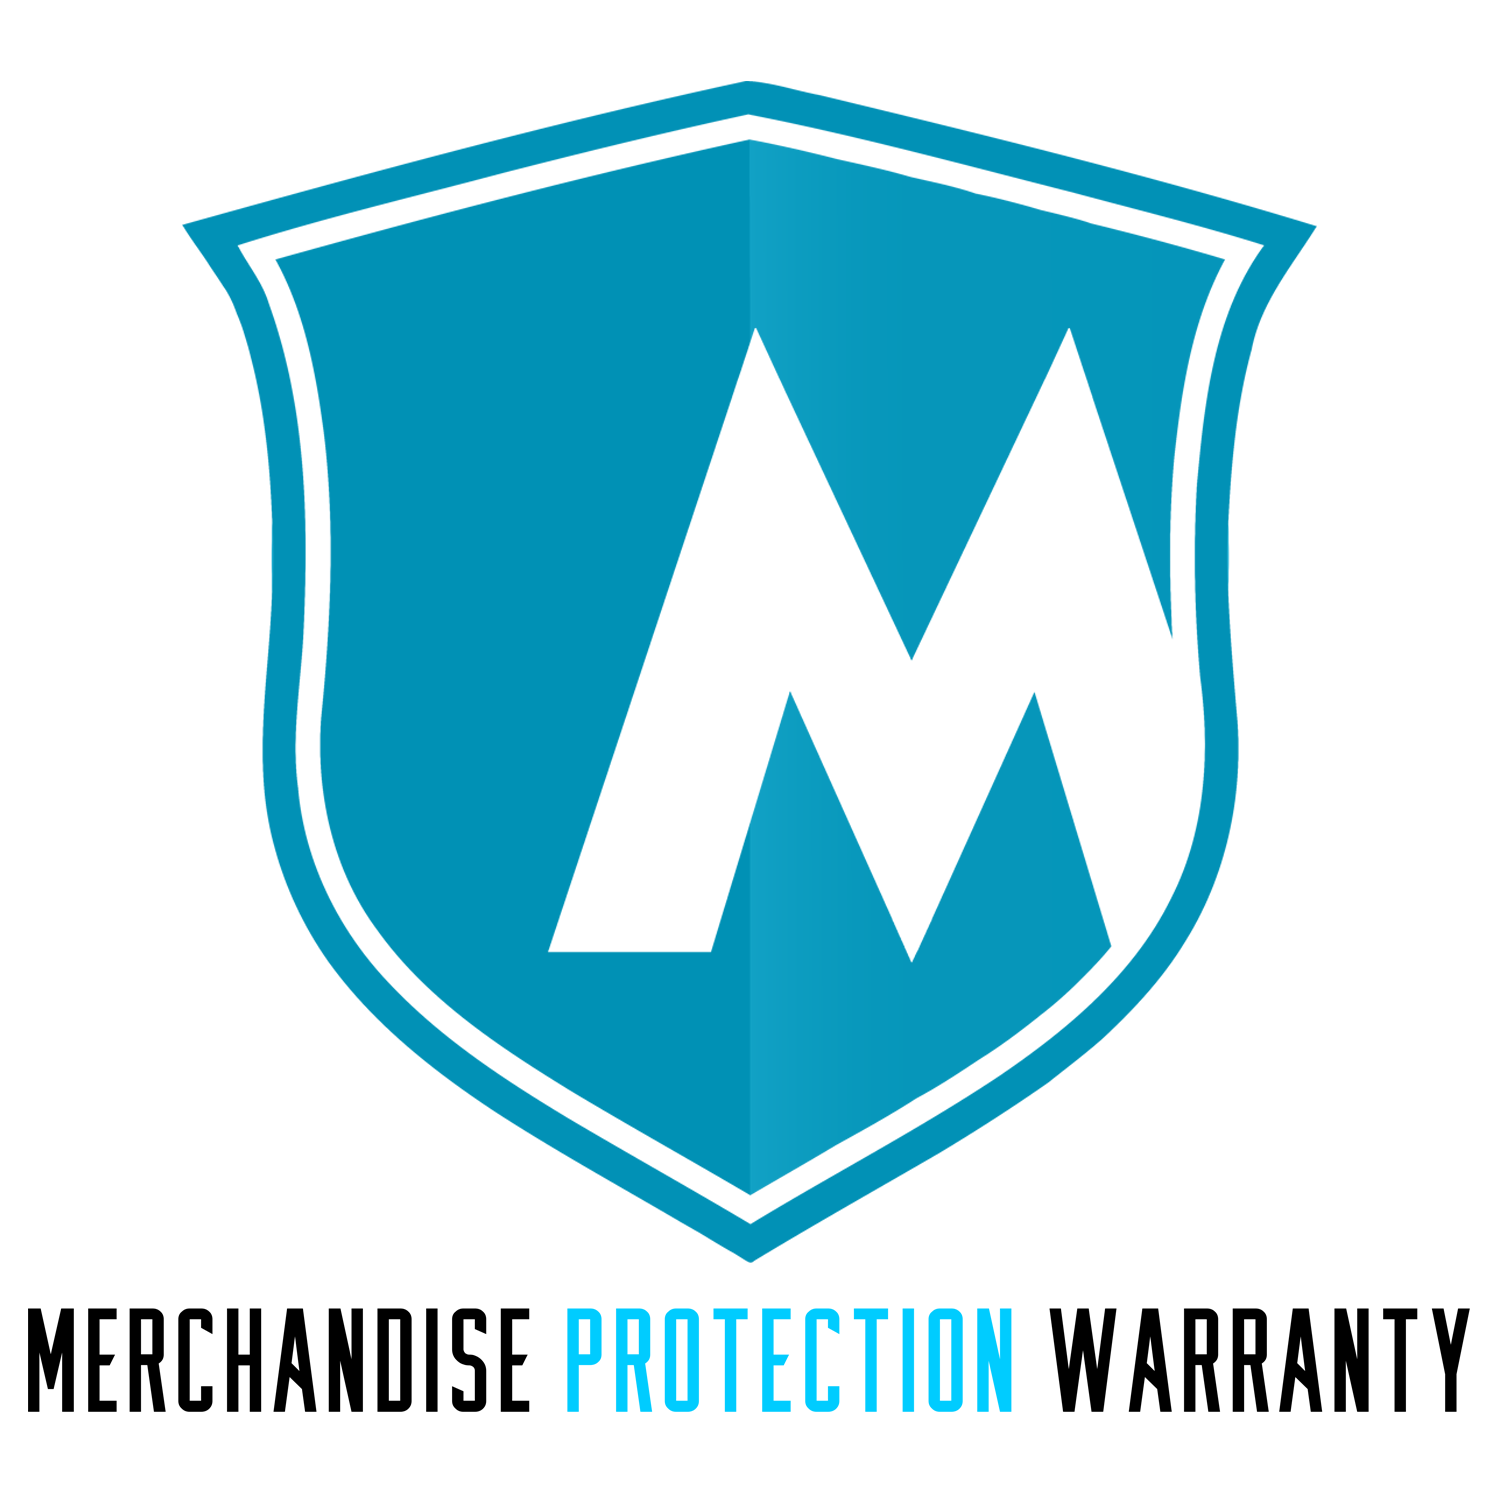 2 Year Merchandise Protection Warranty under $3000 (Accidental, Prepaid Shipping)